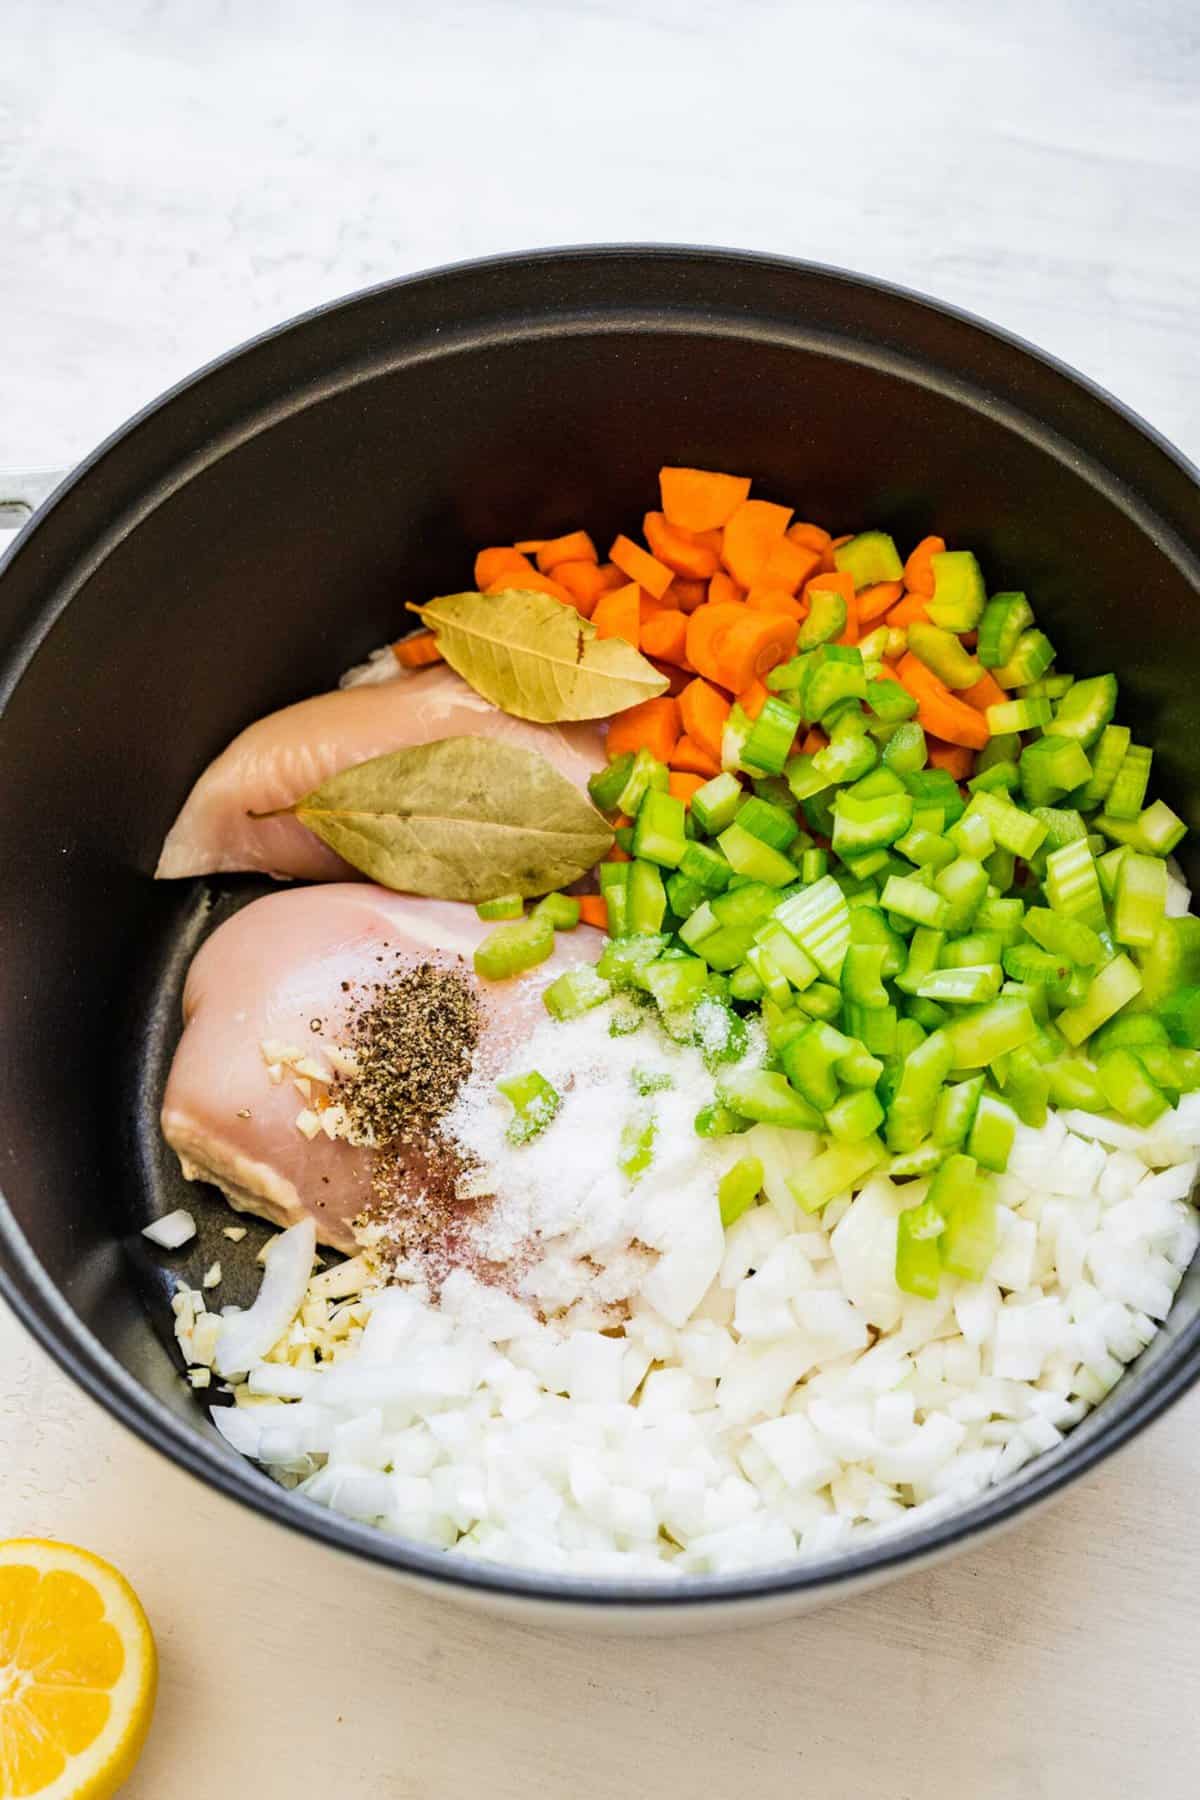 raw chicken, bay leaves, uncooked carrots, celery, onion, and seasonings in a large pot